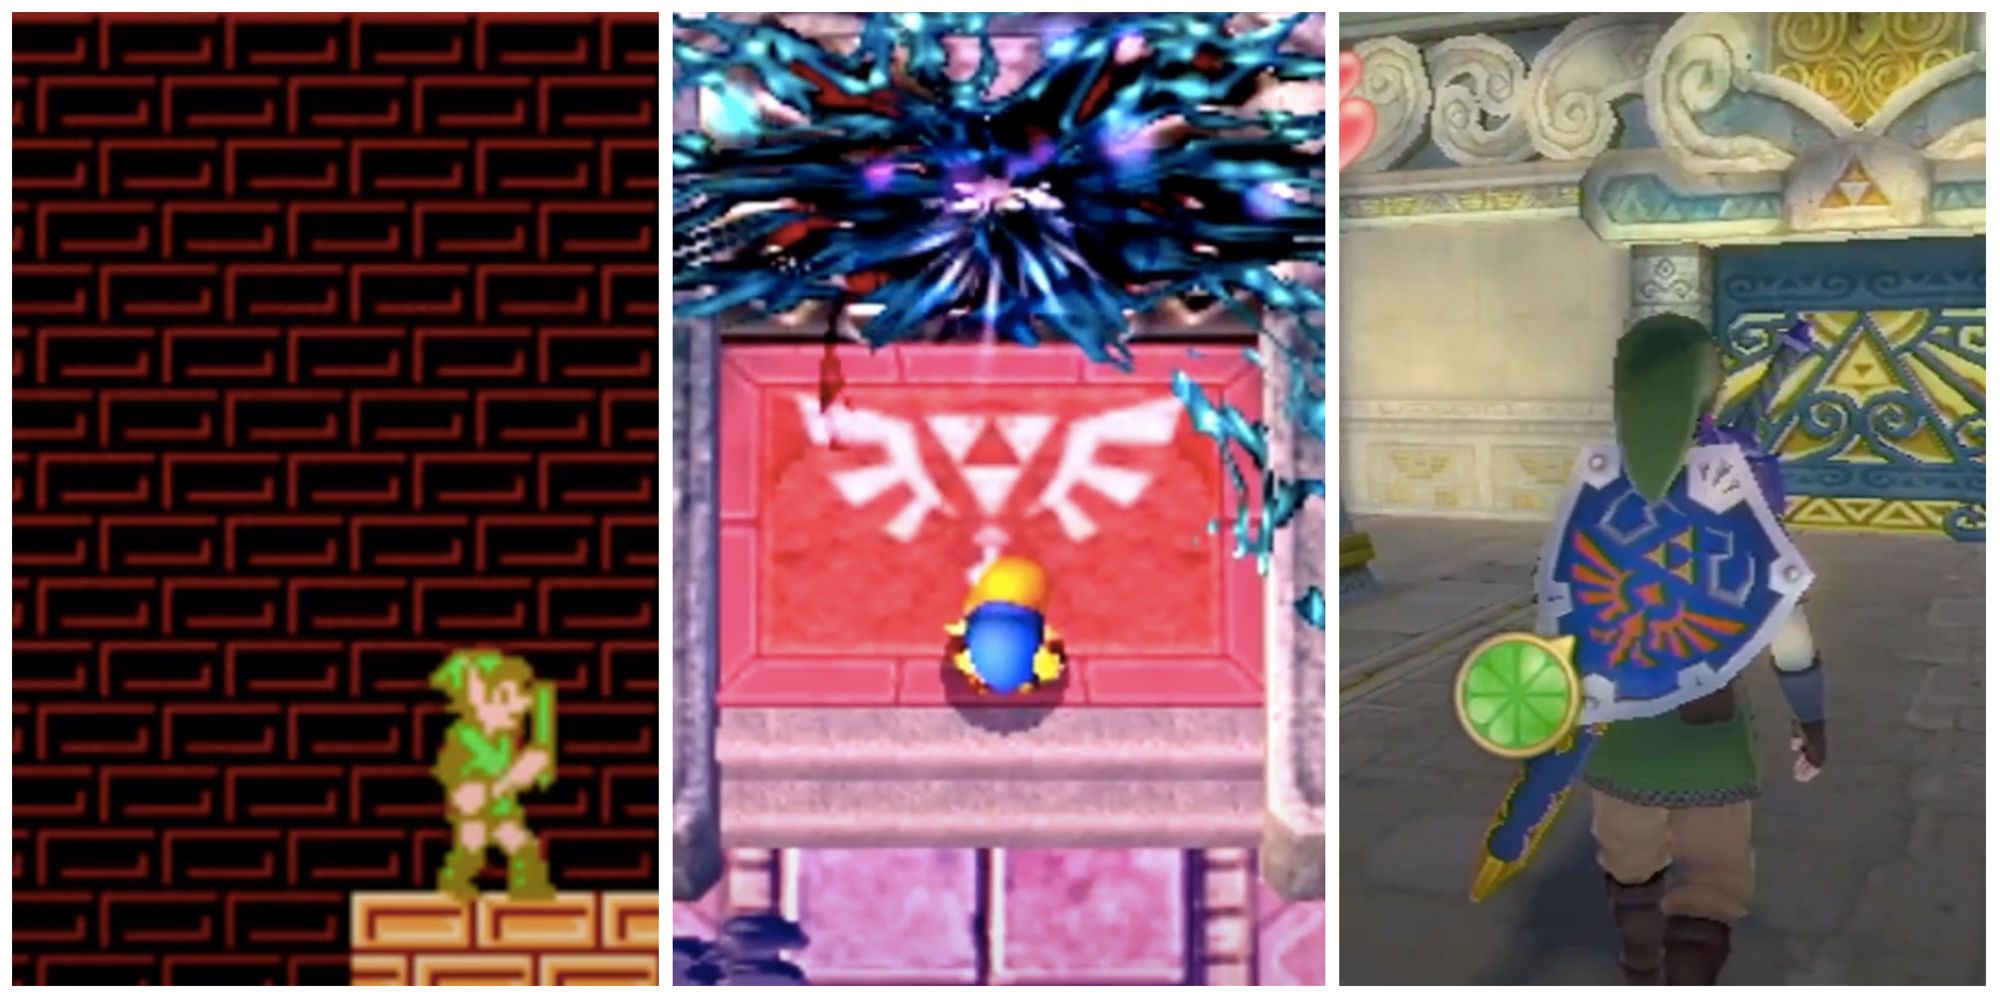 Daily Debate: Do You Wish for a Zelda Game That Has Multiple Ending  Options? - Zelda Dungeon